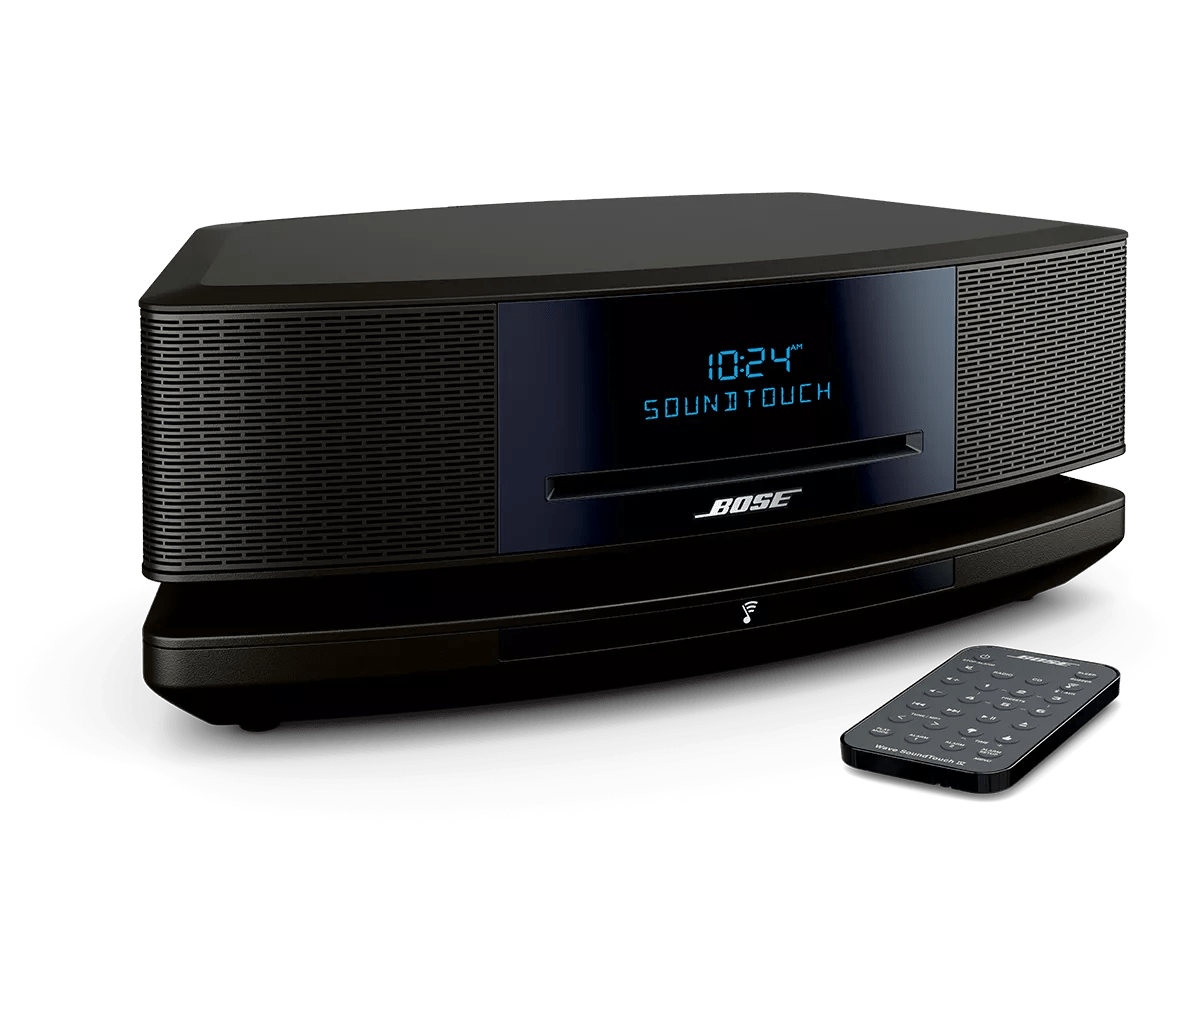 Product Support for Bose Speakers / Wave Systems